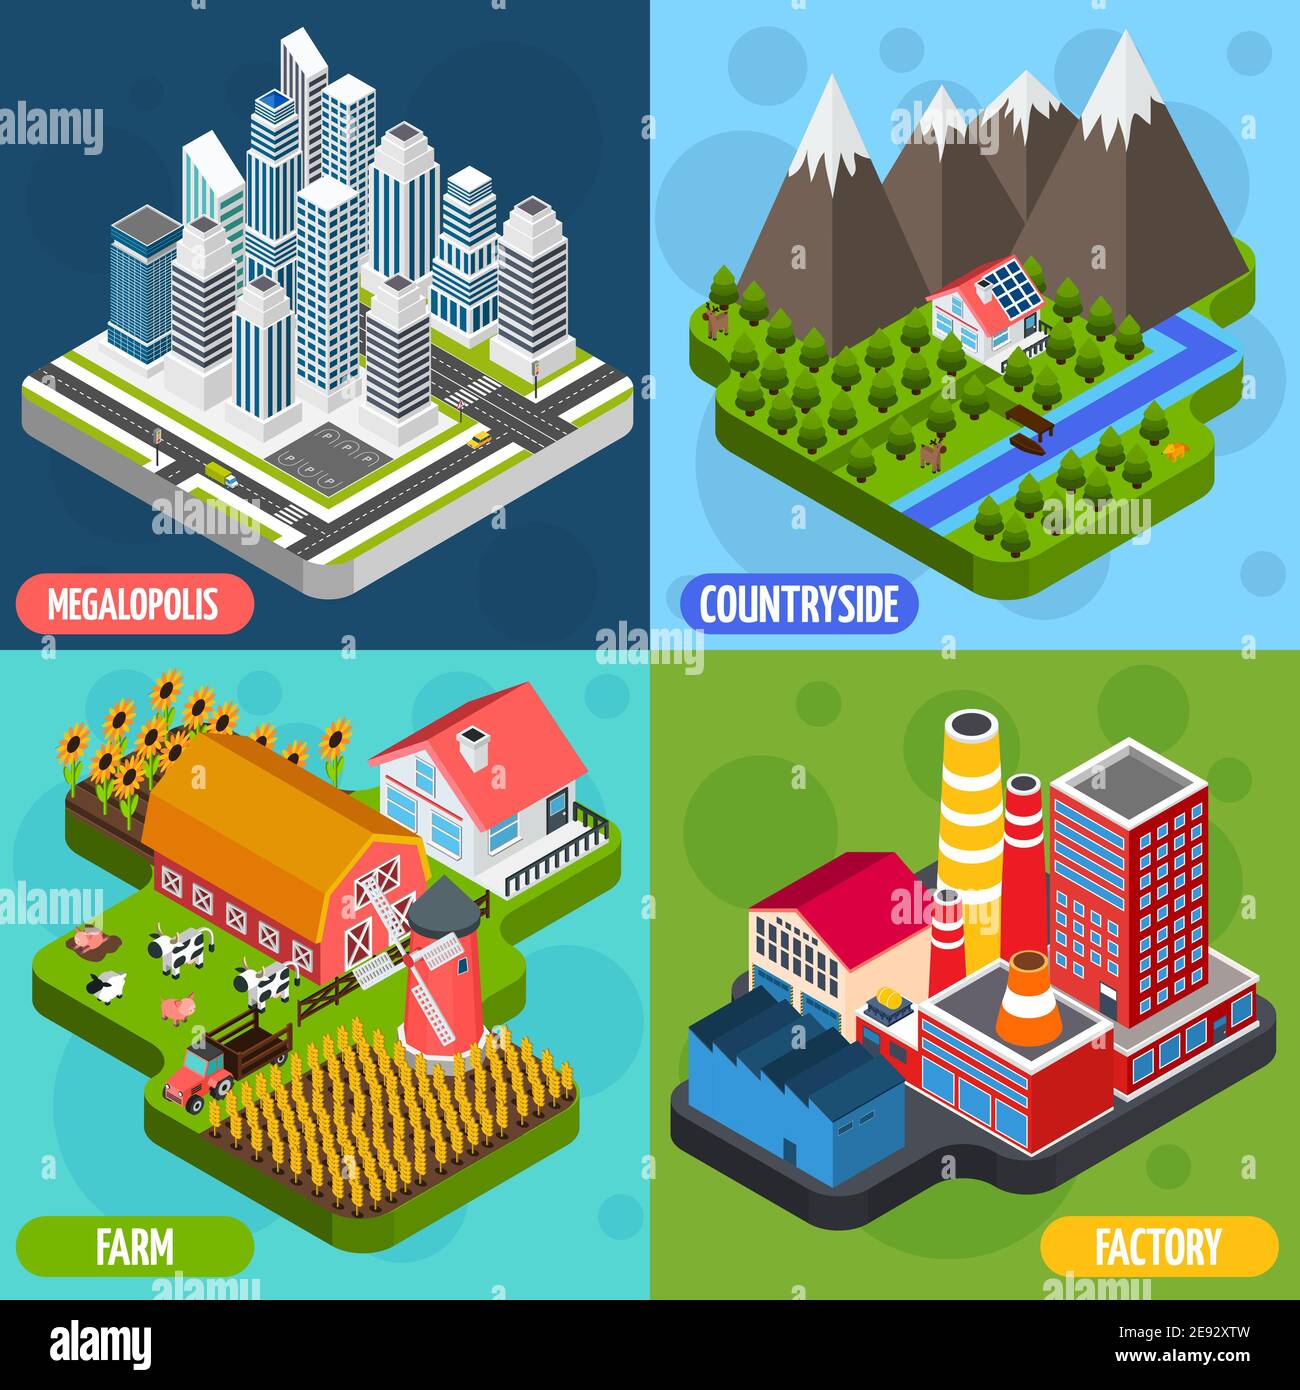 Factory farming agriculture countryside facilities and megalopolis 4 isometric icons square composition banner abstract isolated illustration vector Stock Vector